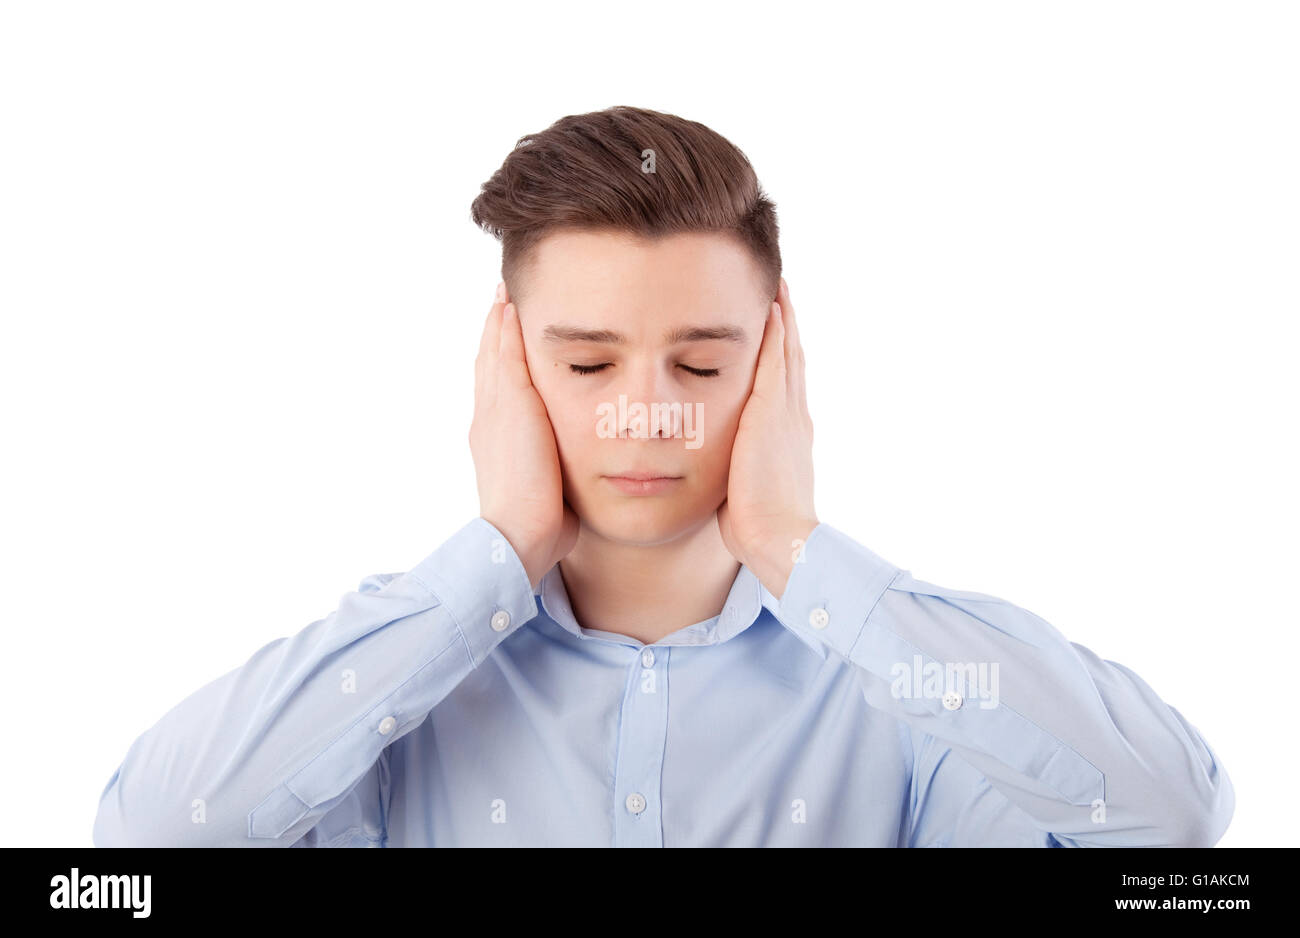 boy closing his ears with hands, isolated on white Stock Photo